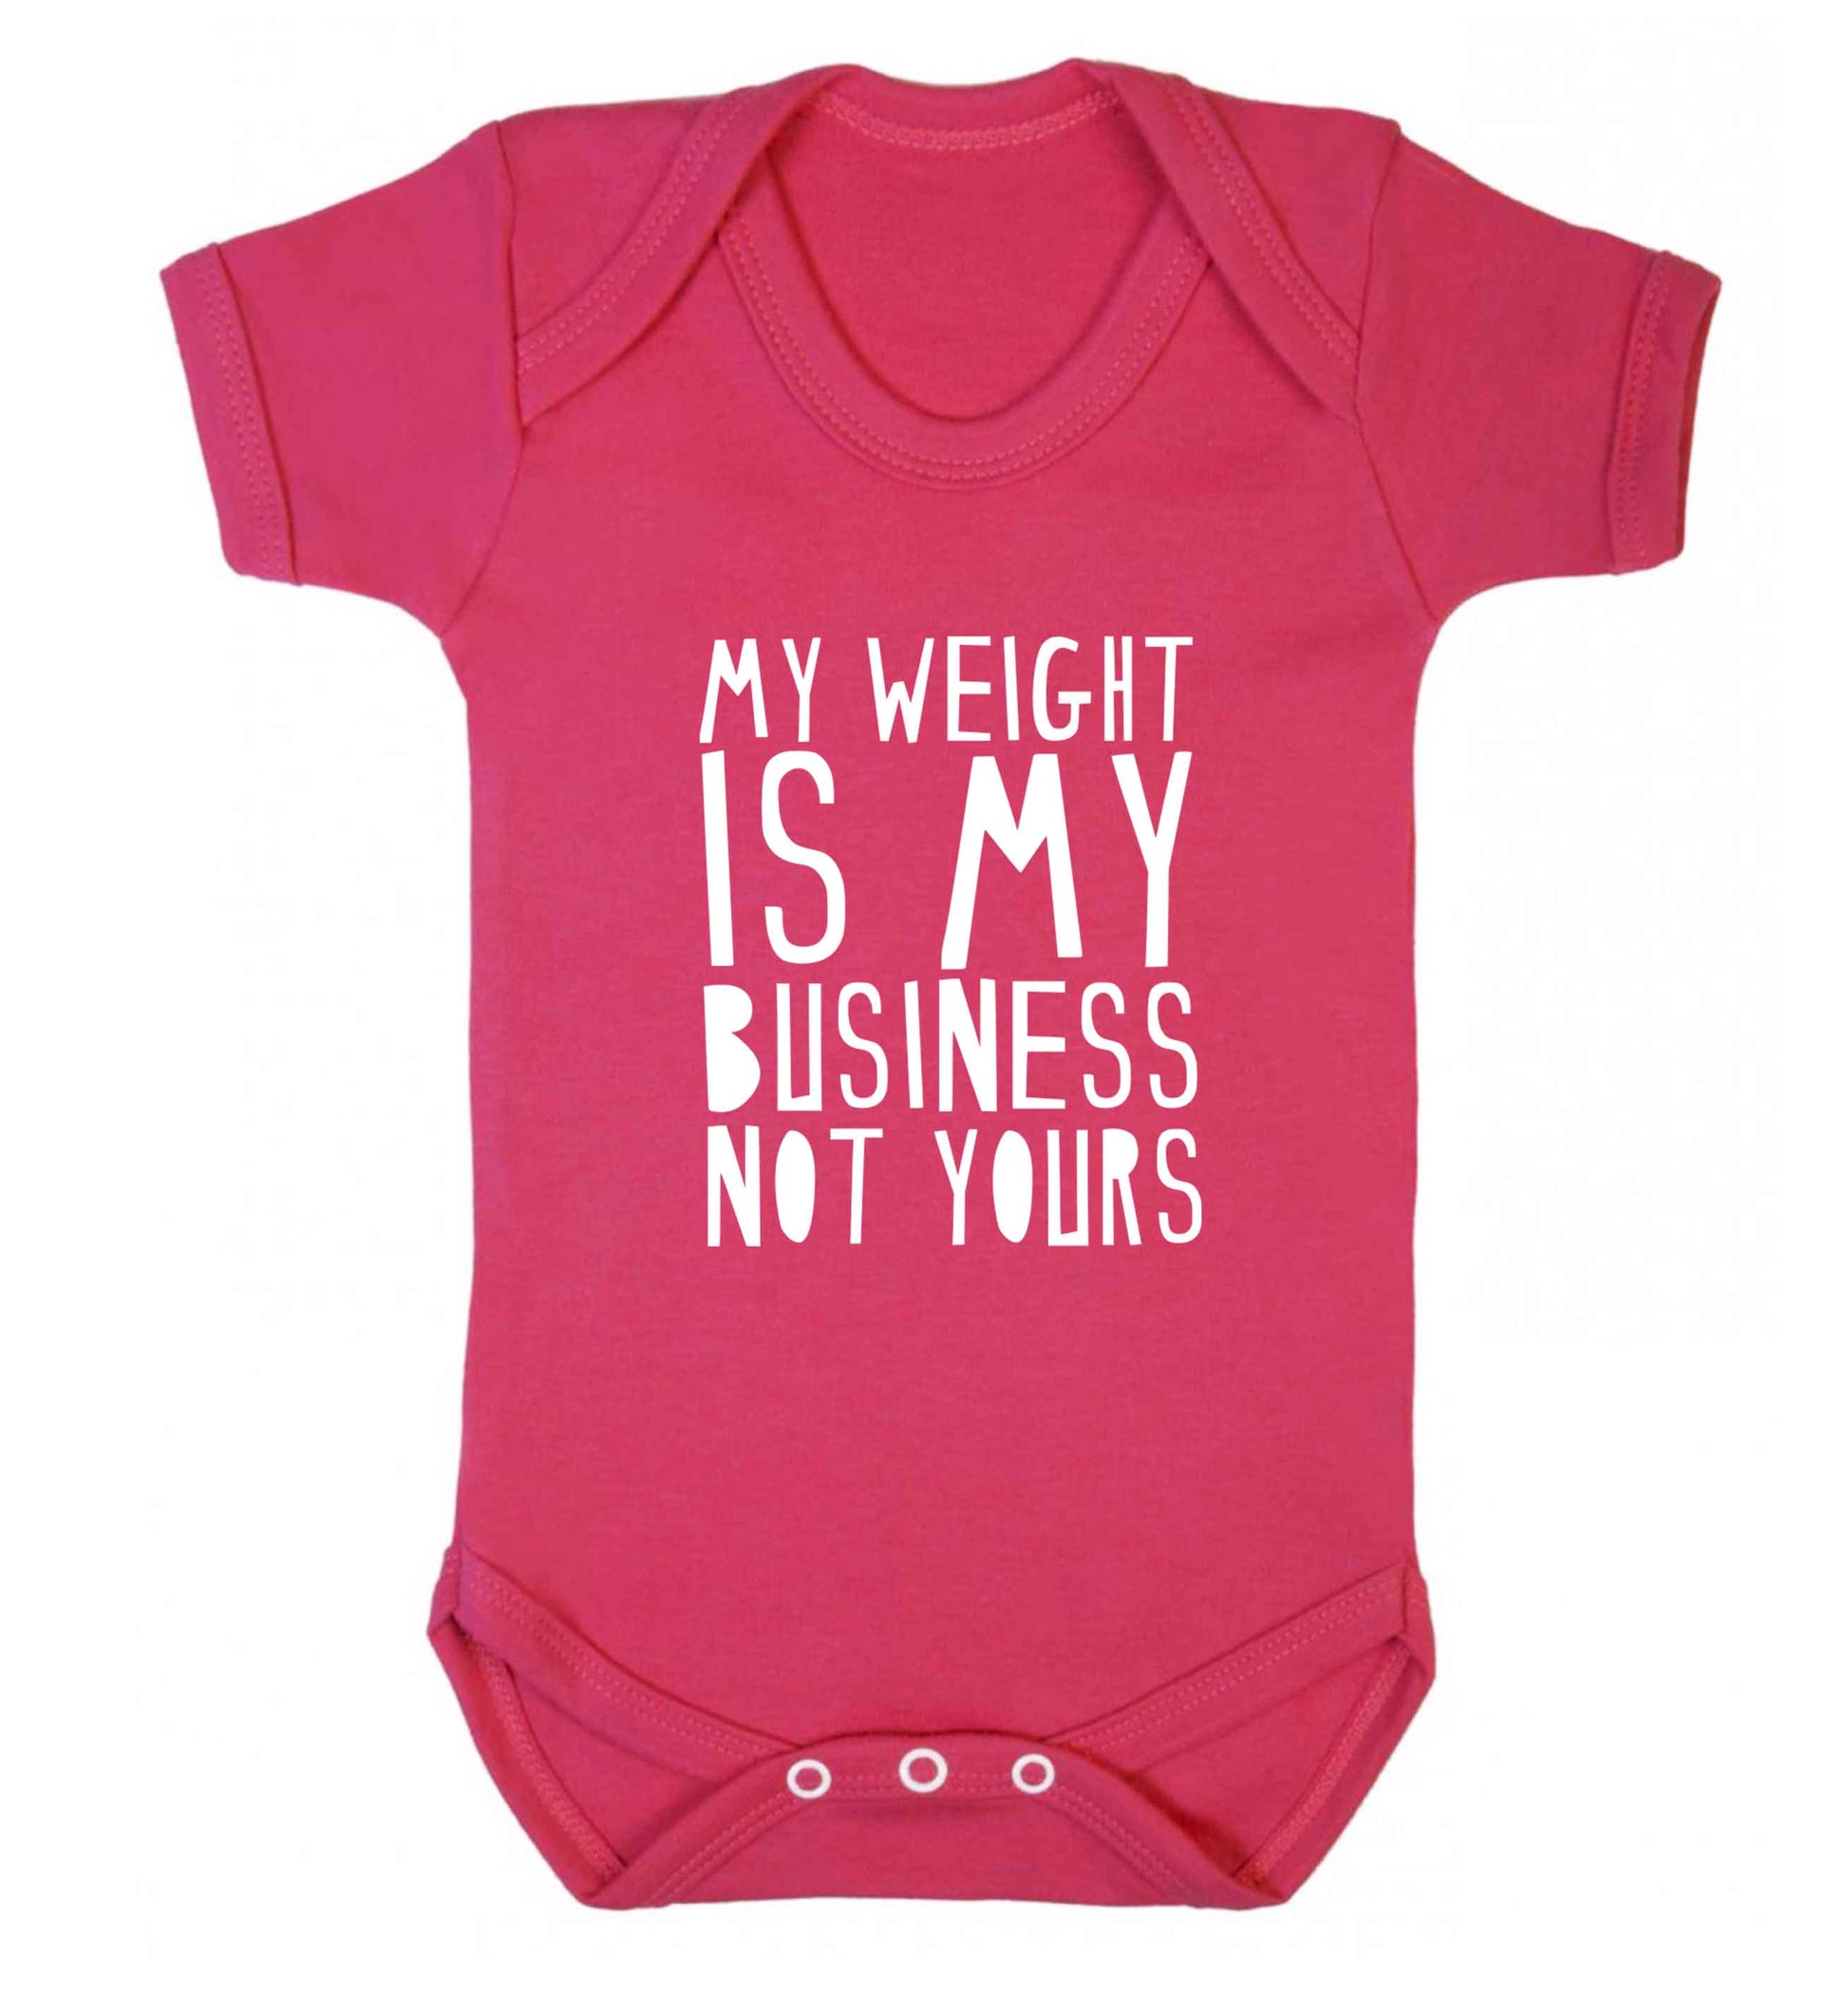 My weight is my business not yours baby vest dark pink 18-24 months